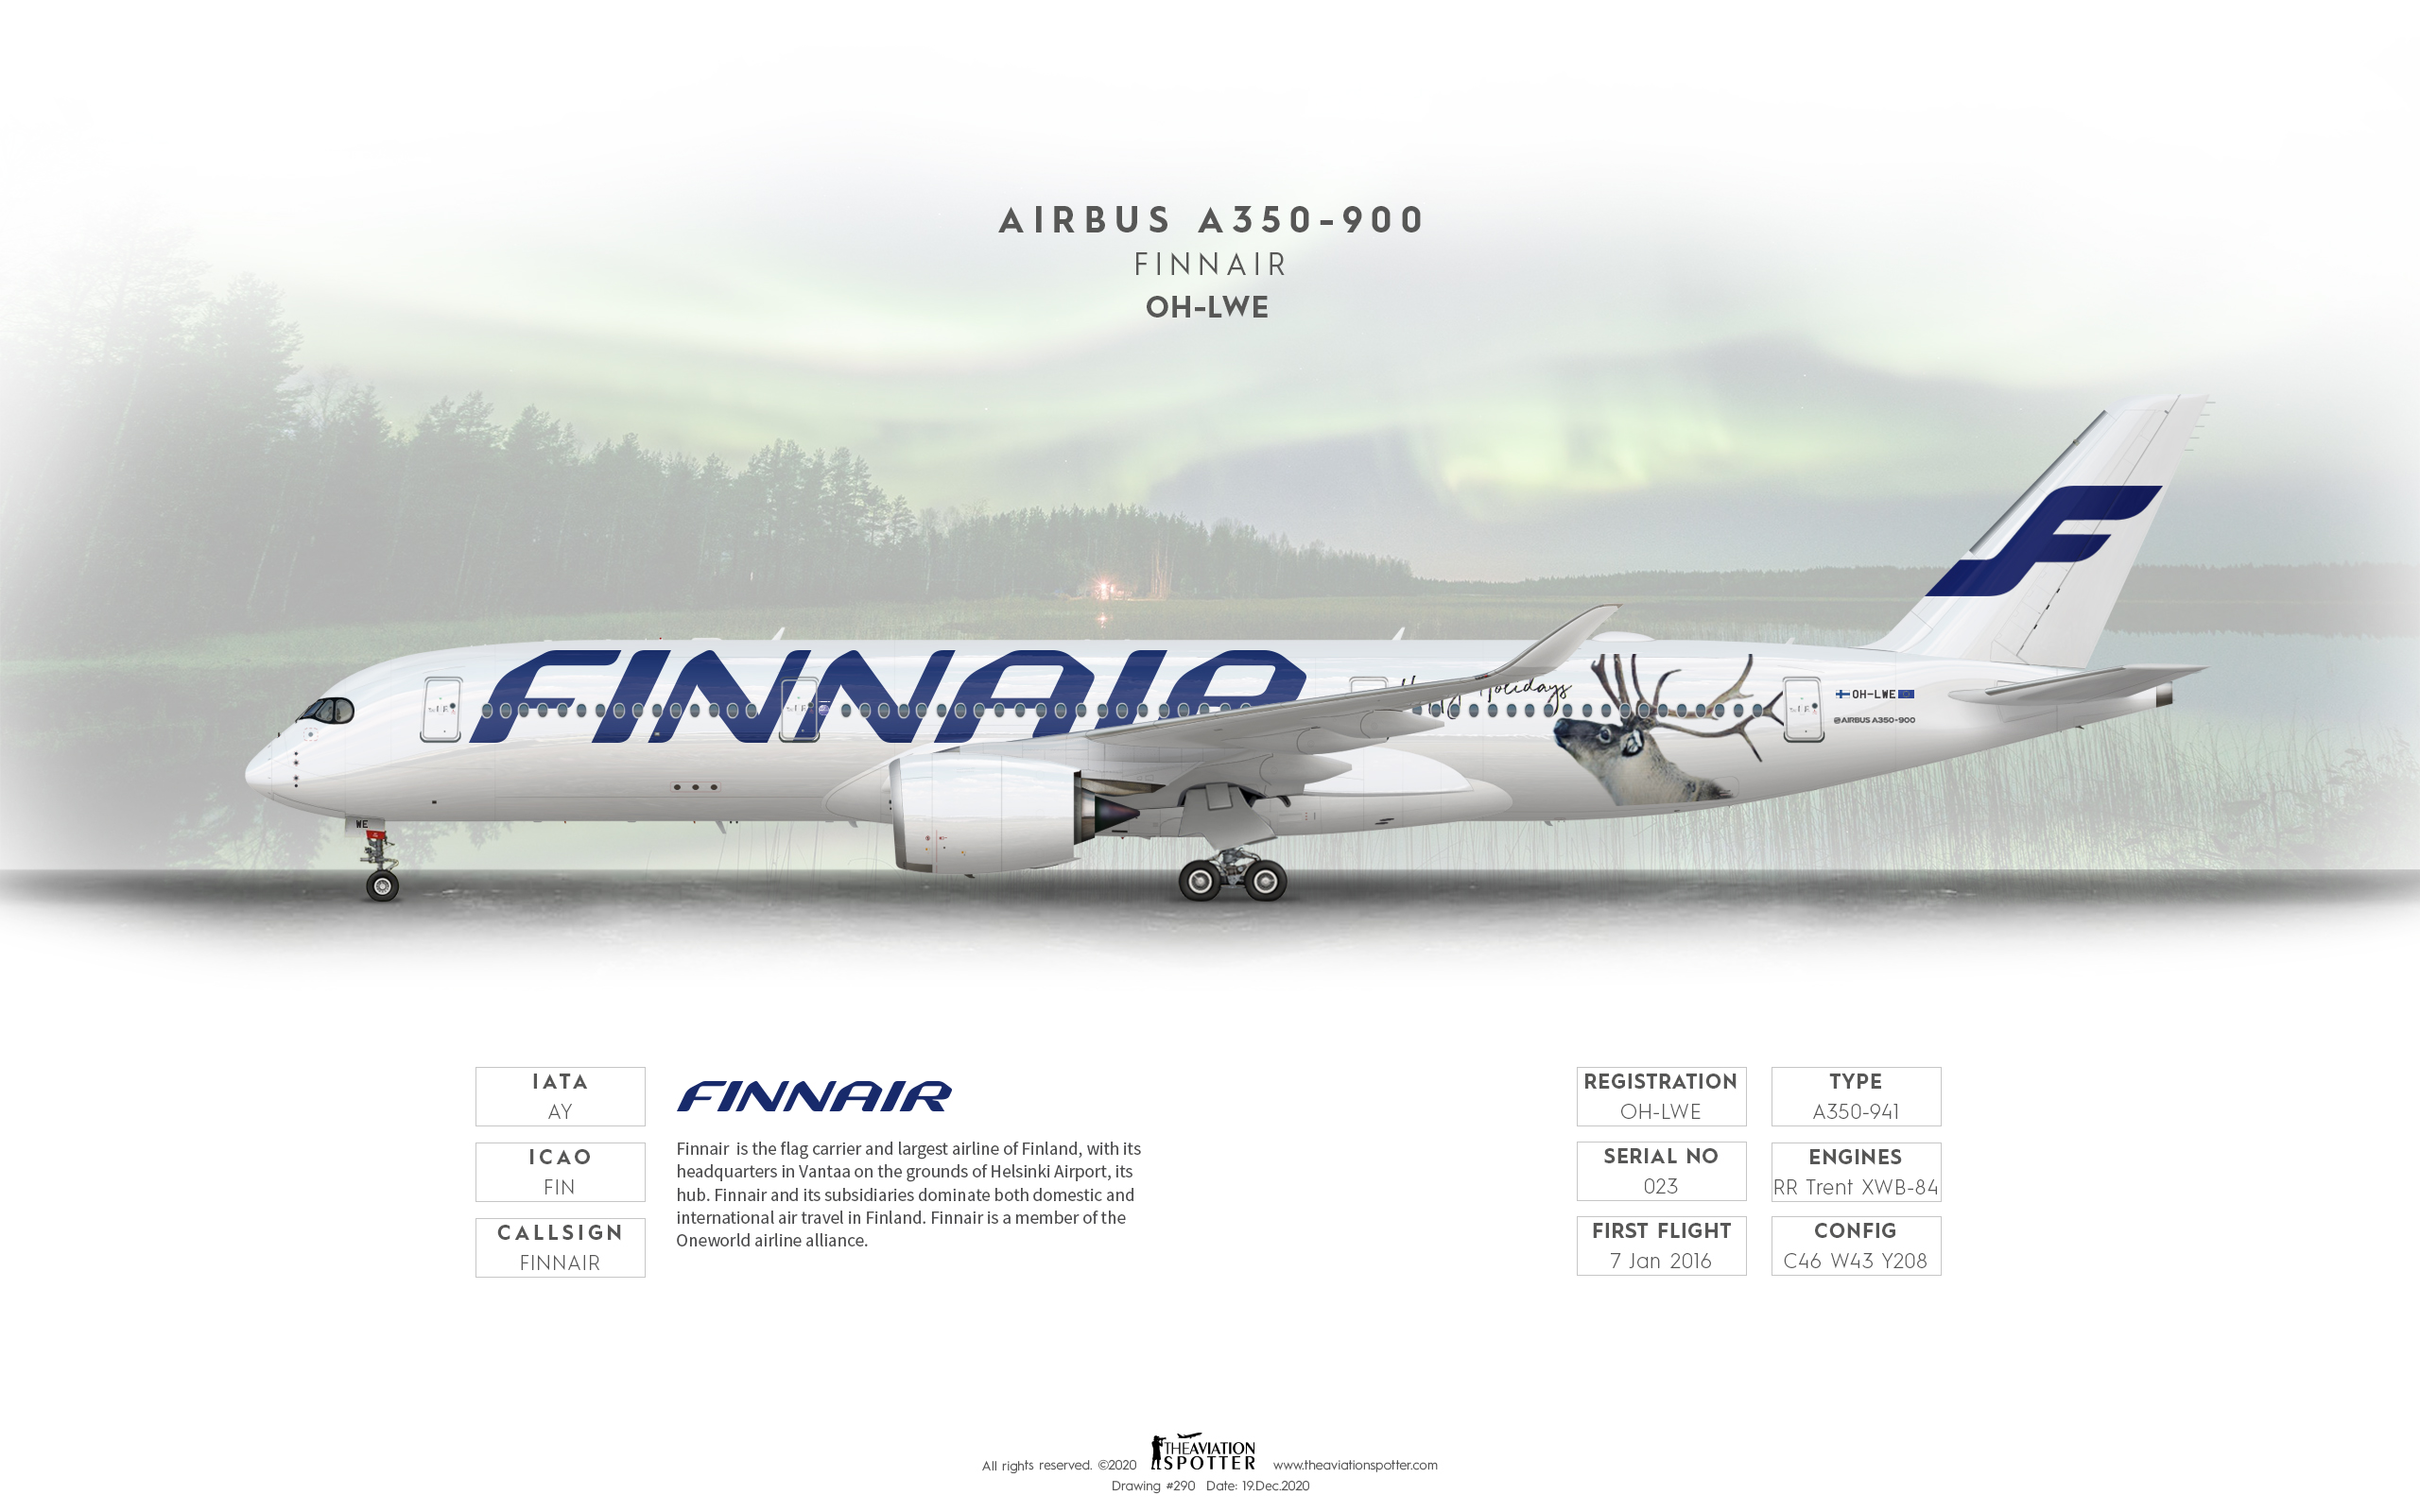 Finnair A350-900 ''Happy Holidays Livery'' - Theaviationspotter's 